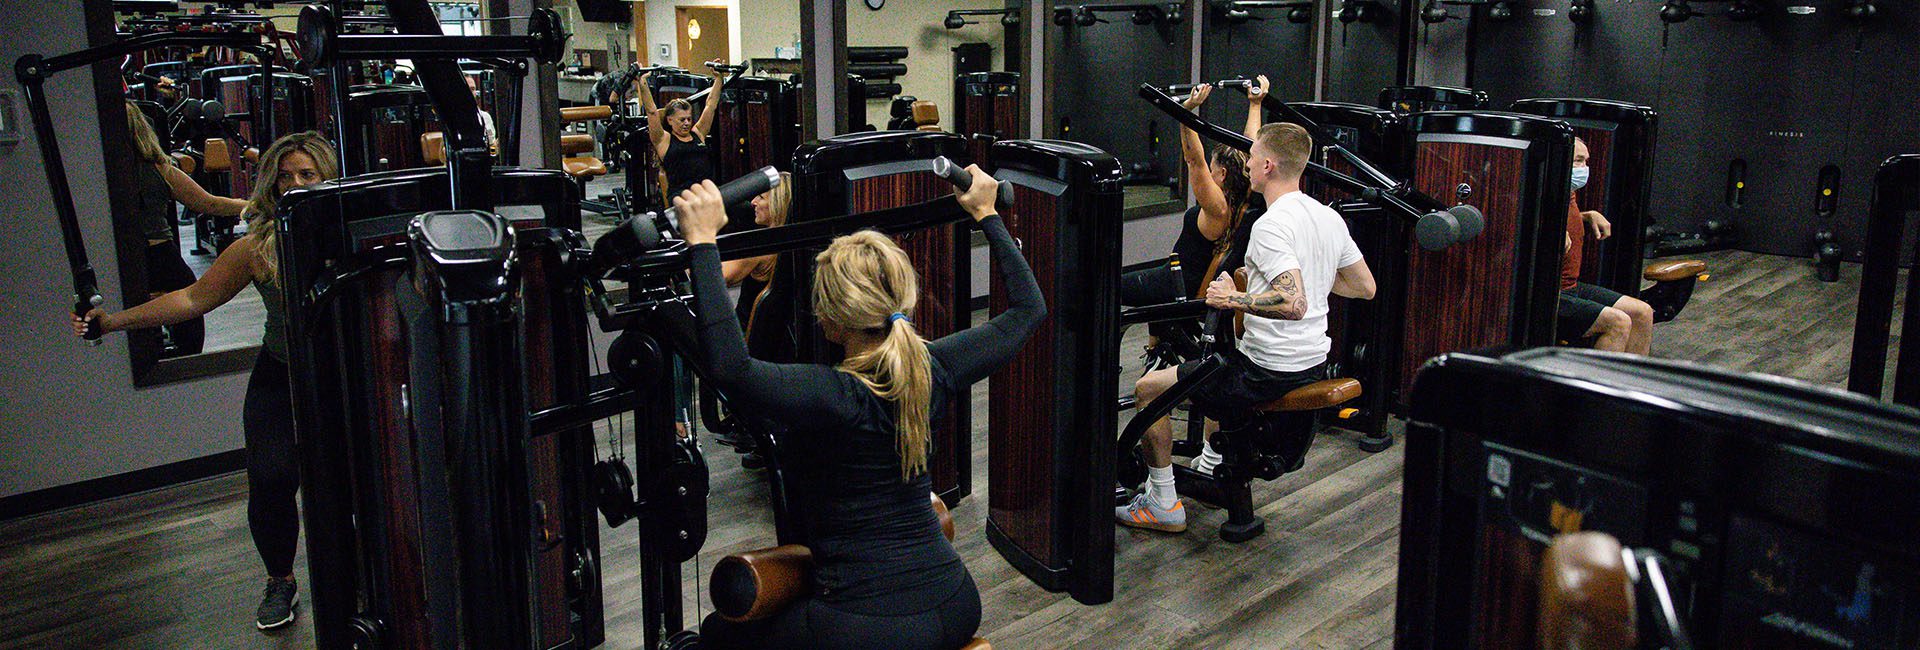 people working out with modern gym equipment